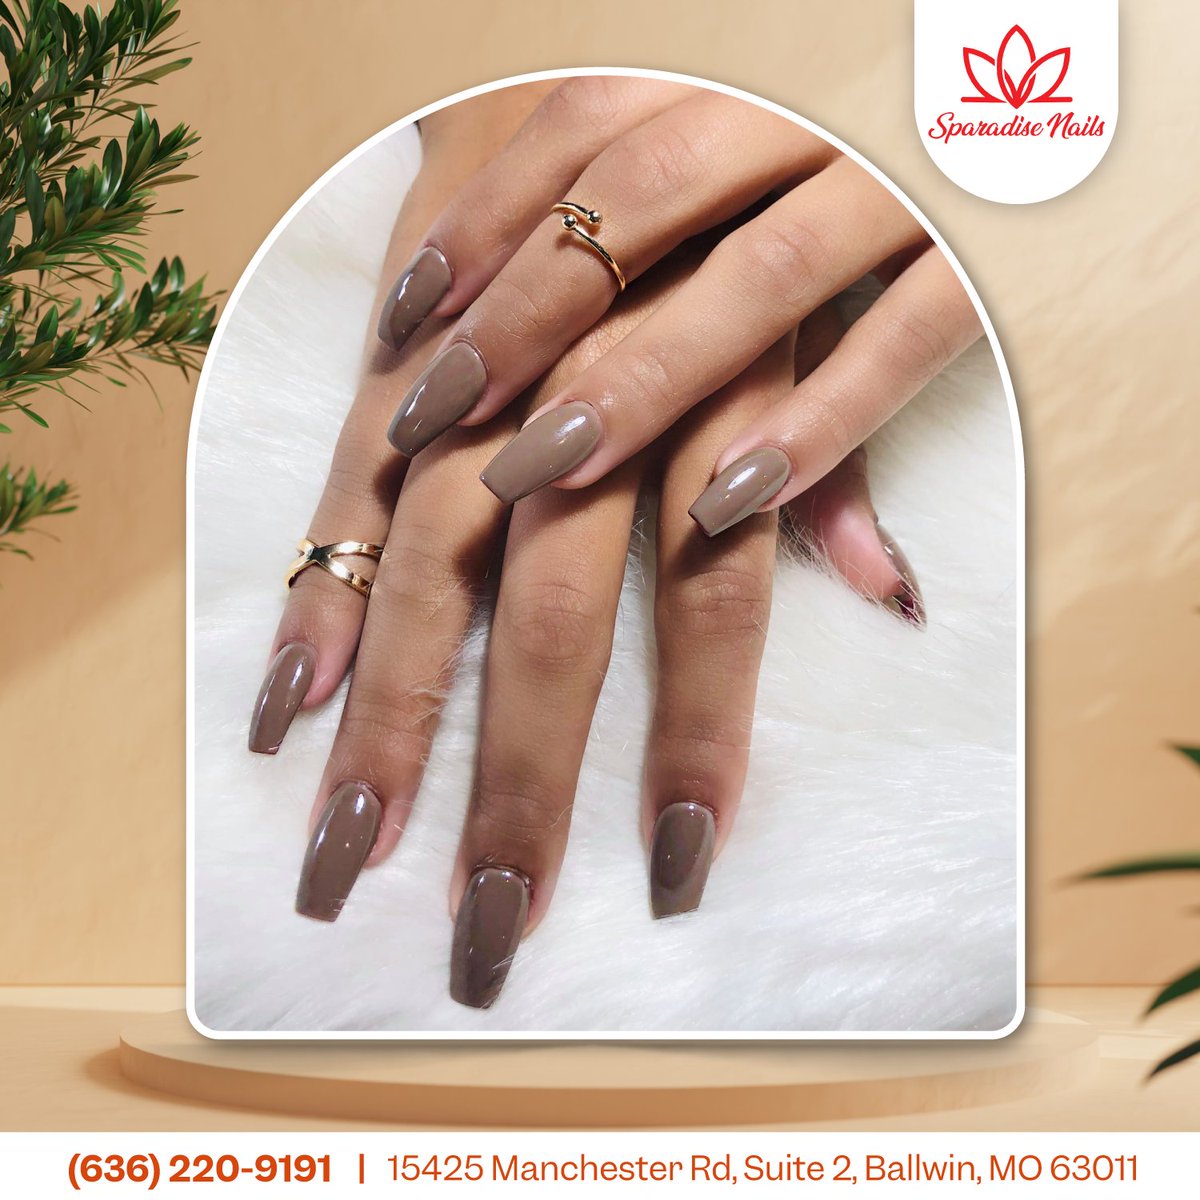 Can't get enough of this gorgeous caramel brown! It's the perfect warm neutral for your nails. 🤎✨
*Booking Online: lk.macmarketing.us/SparadiseNails…
#sparadisenails #nailsalon #nails #nailart #nailsalonballwin #naildesign #spa